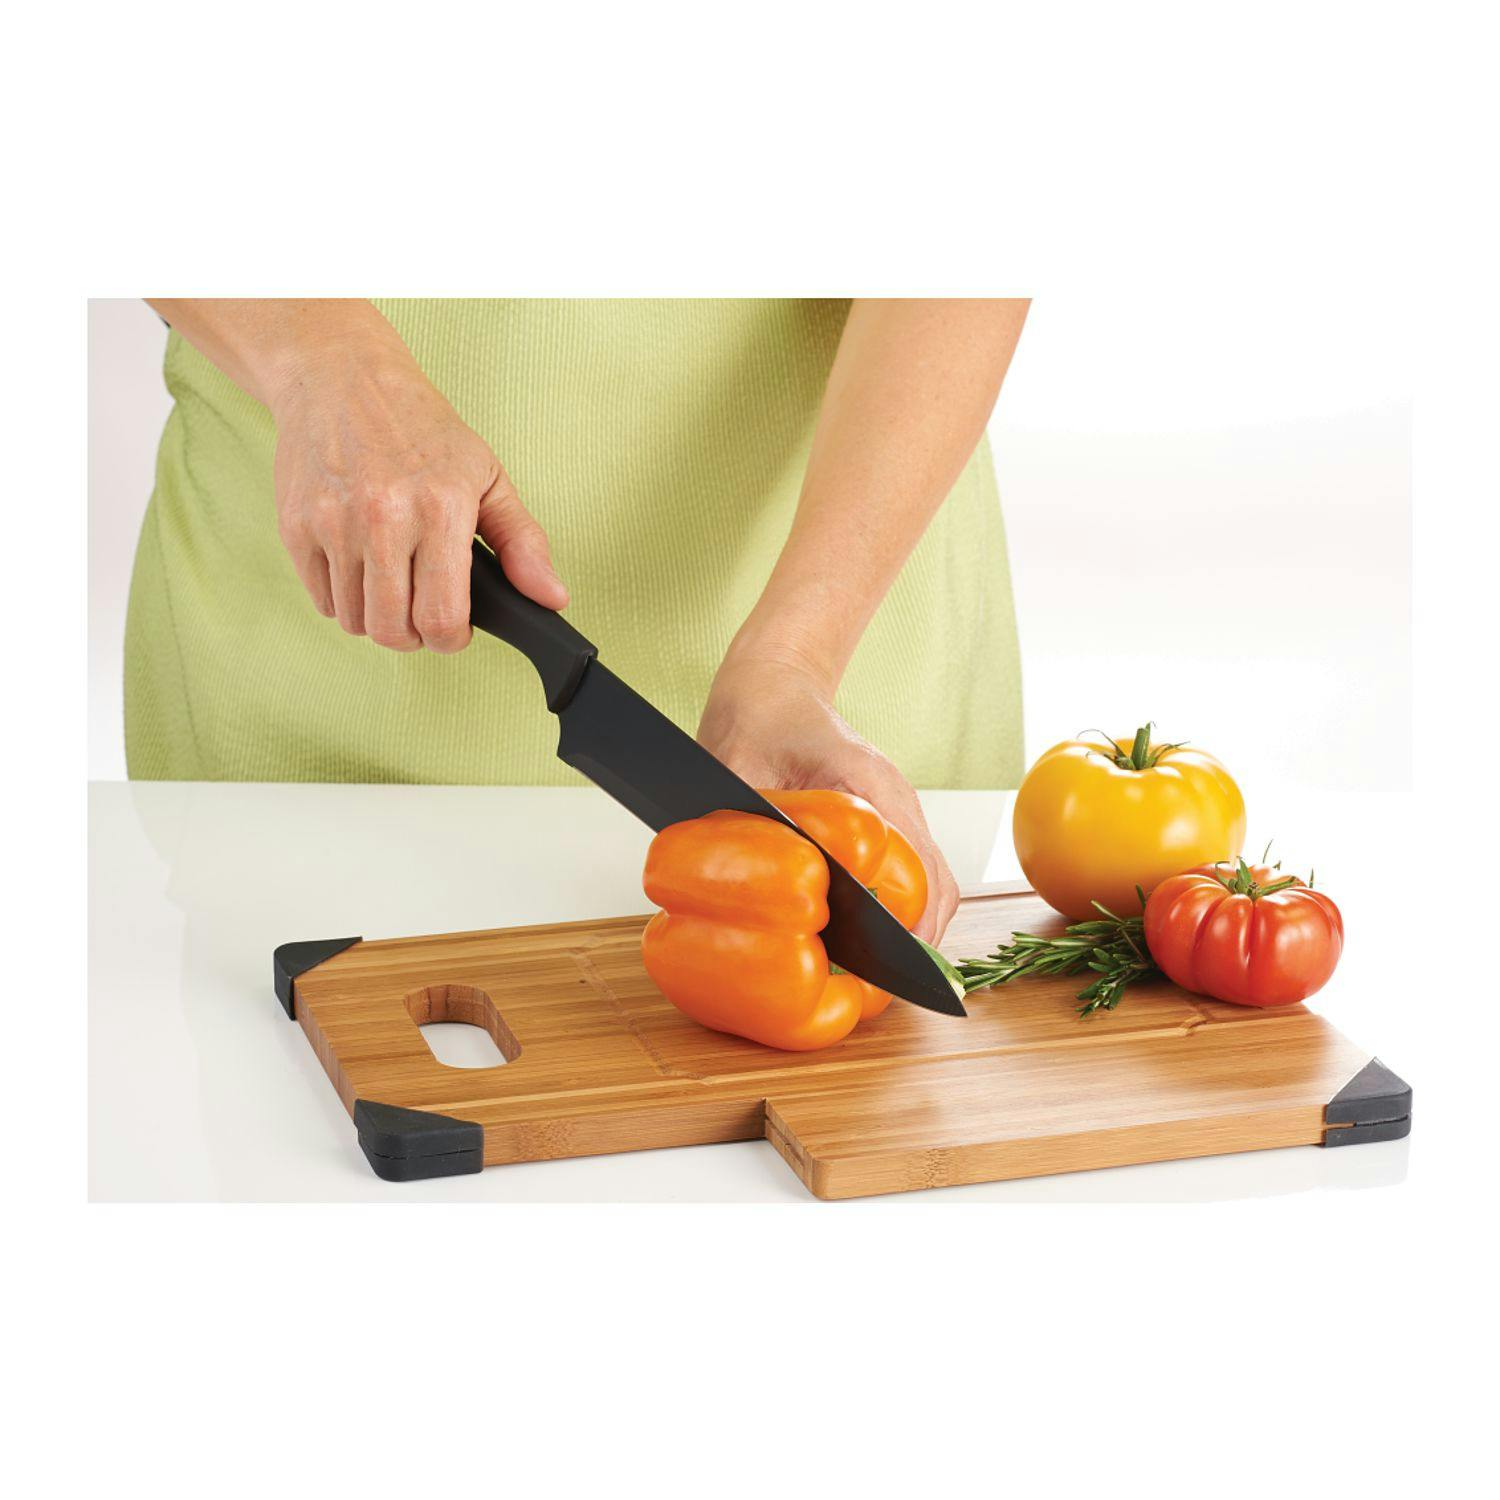 Bamboo Cutting Board with Knife - additional Image 2